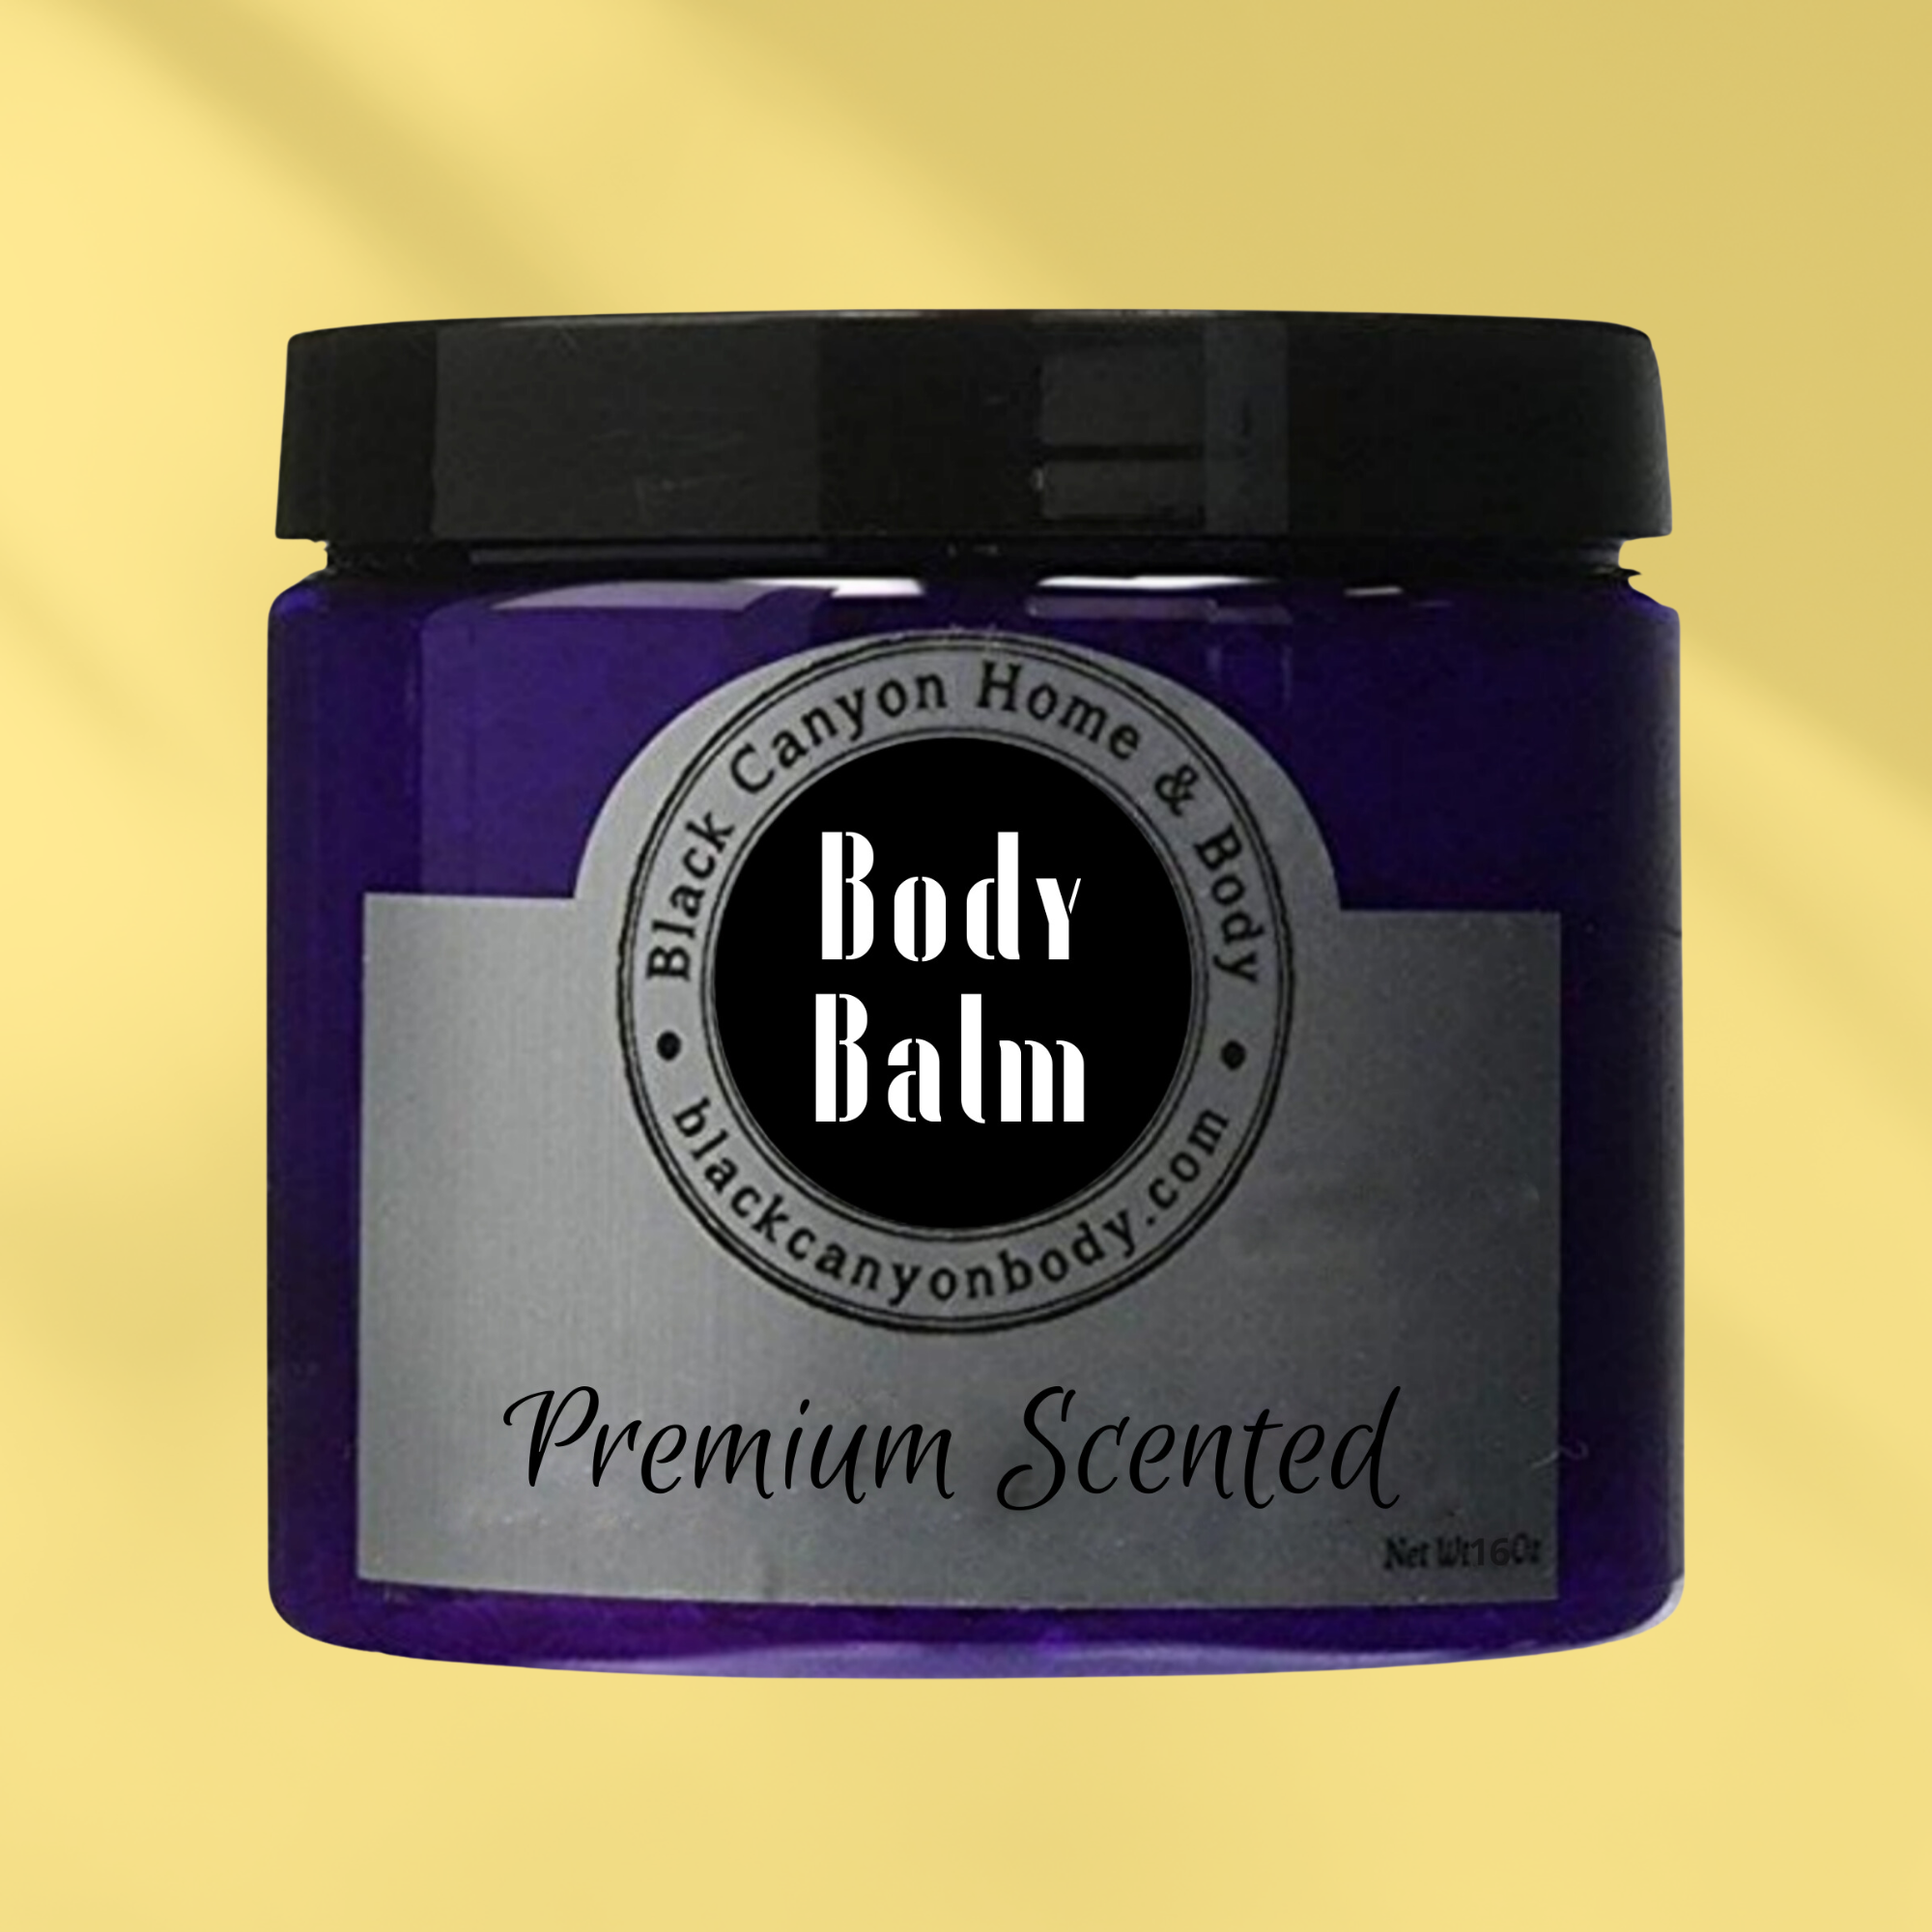 Black Canyon Raspberry Lemonade Scented Natural Body Balm with Shea